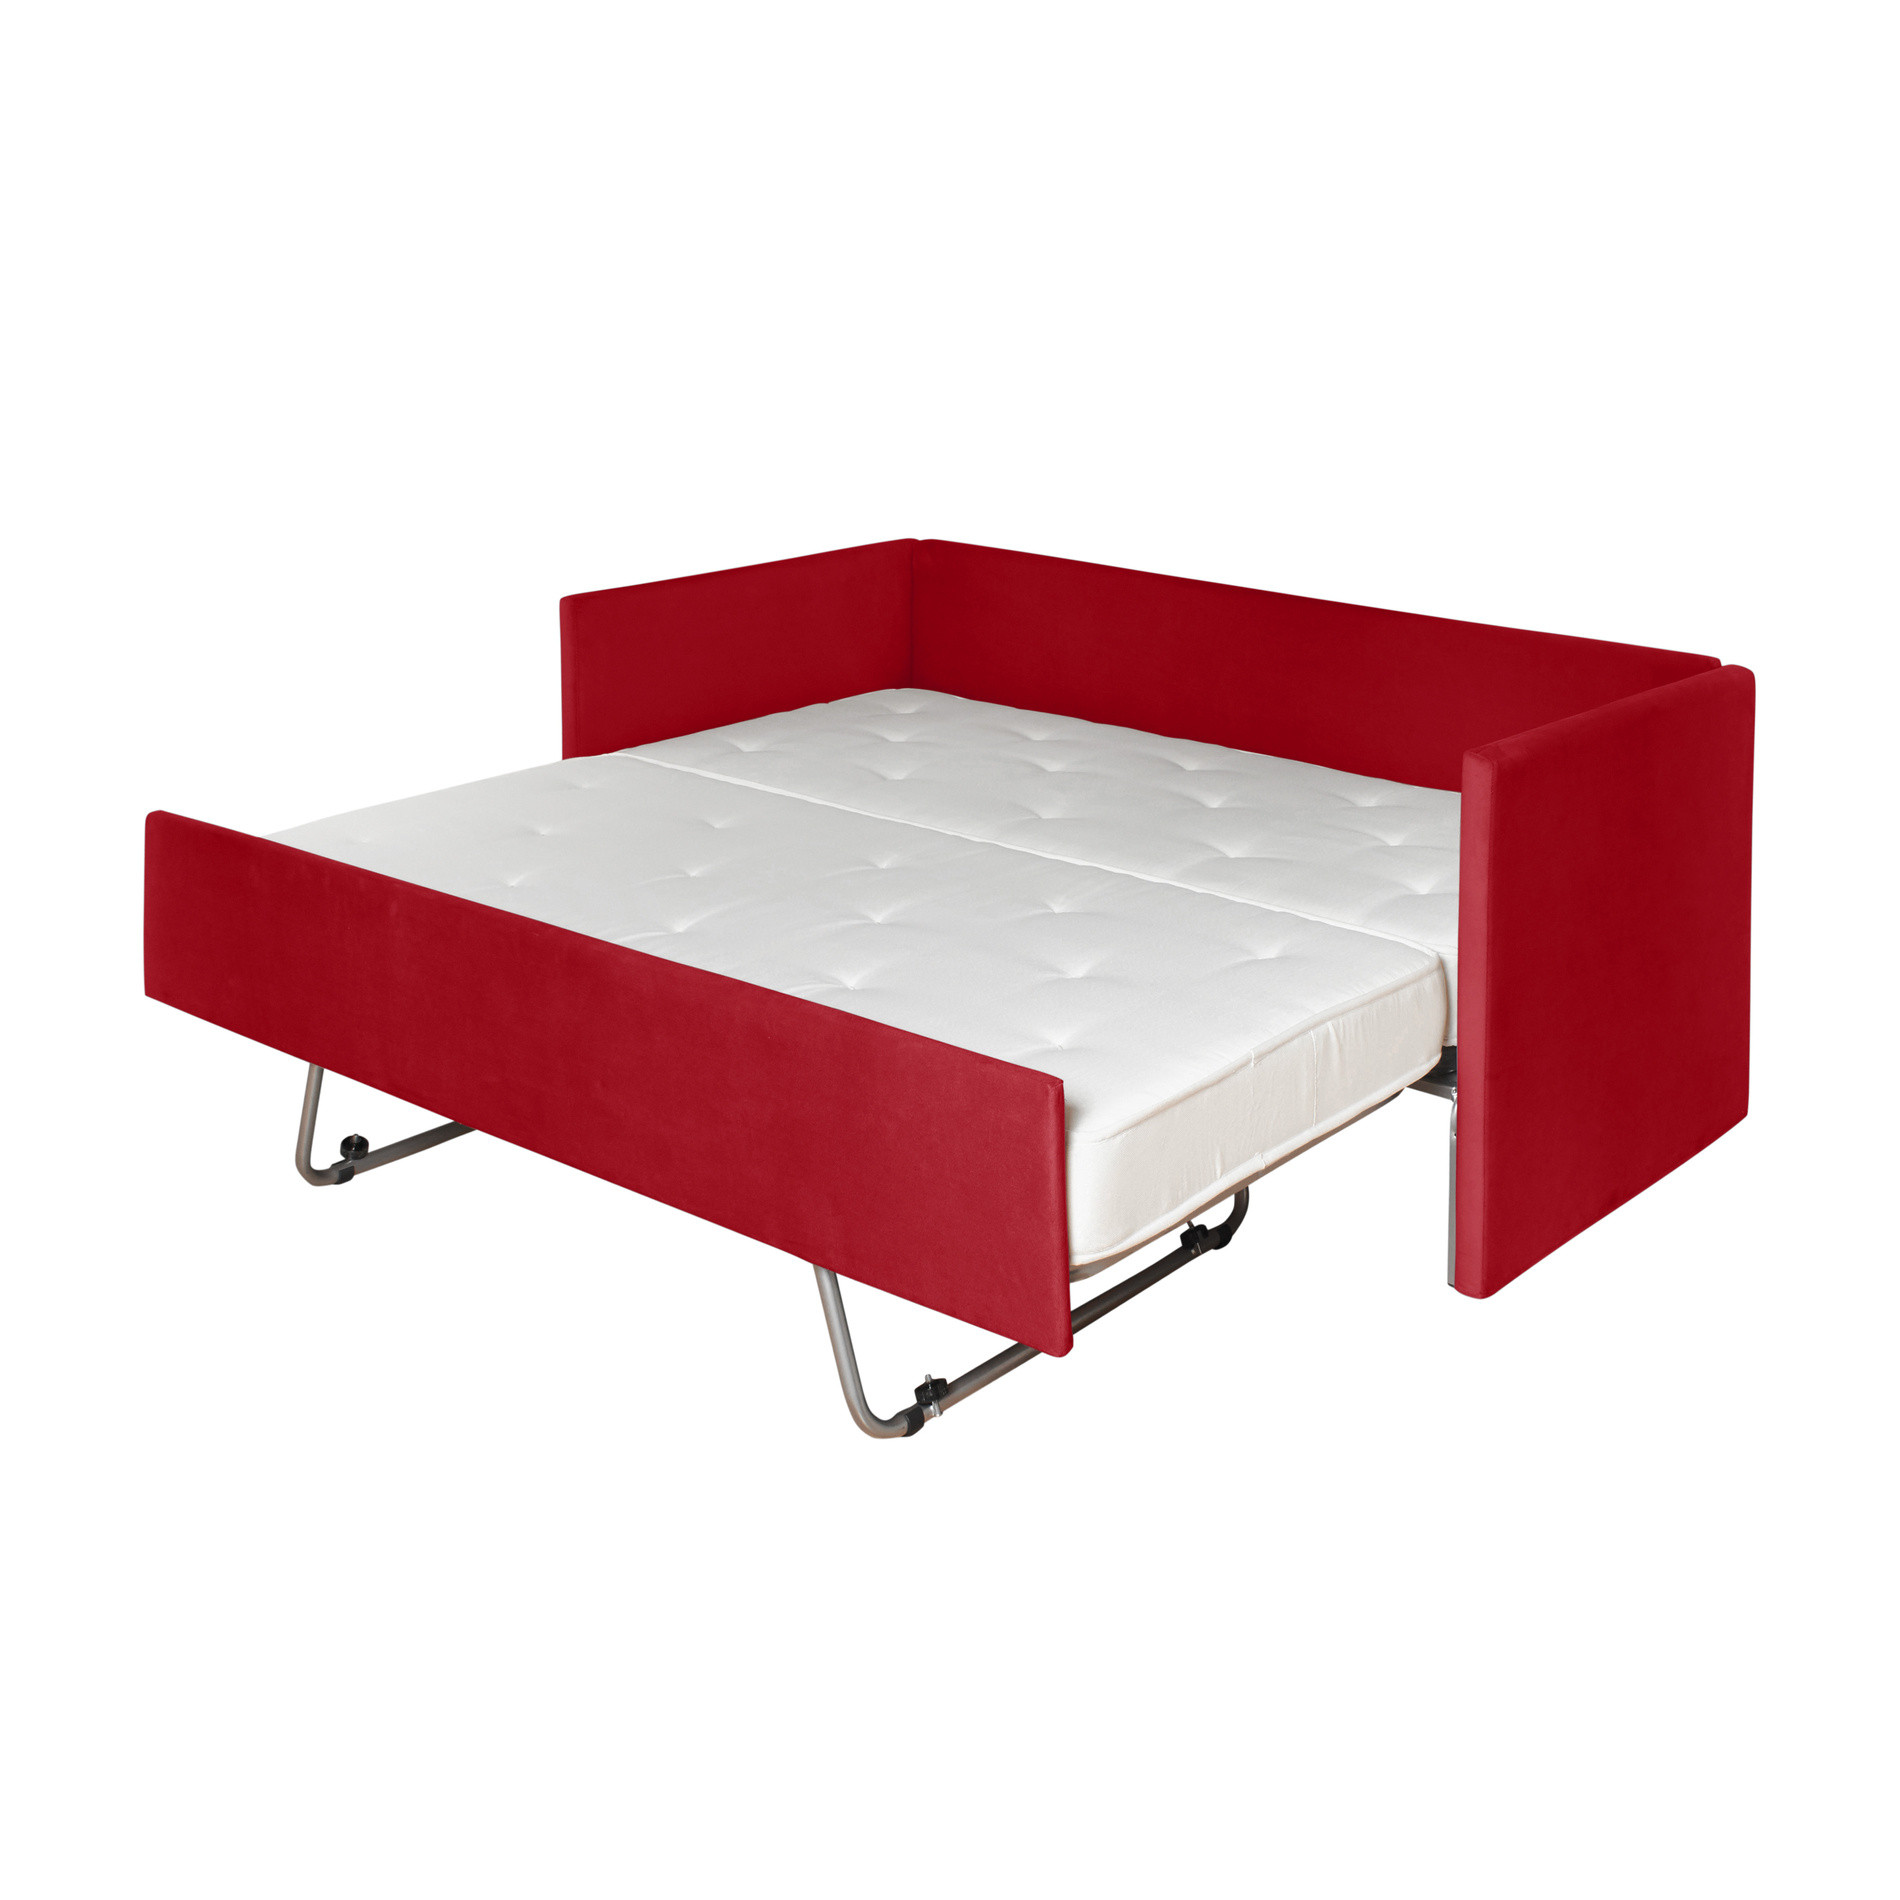 Multi sofa bed, Red, large image number 2